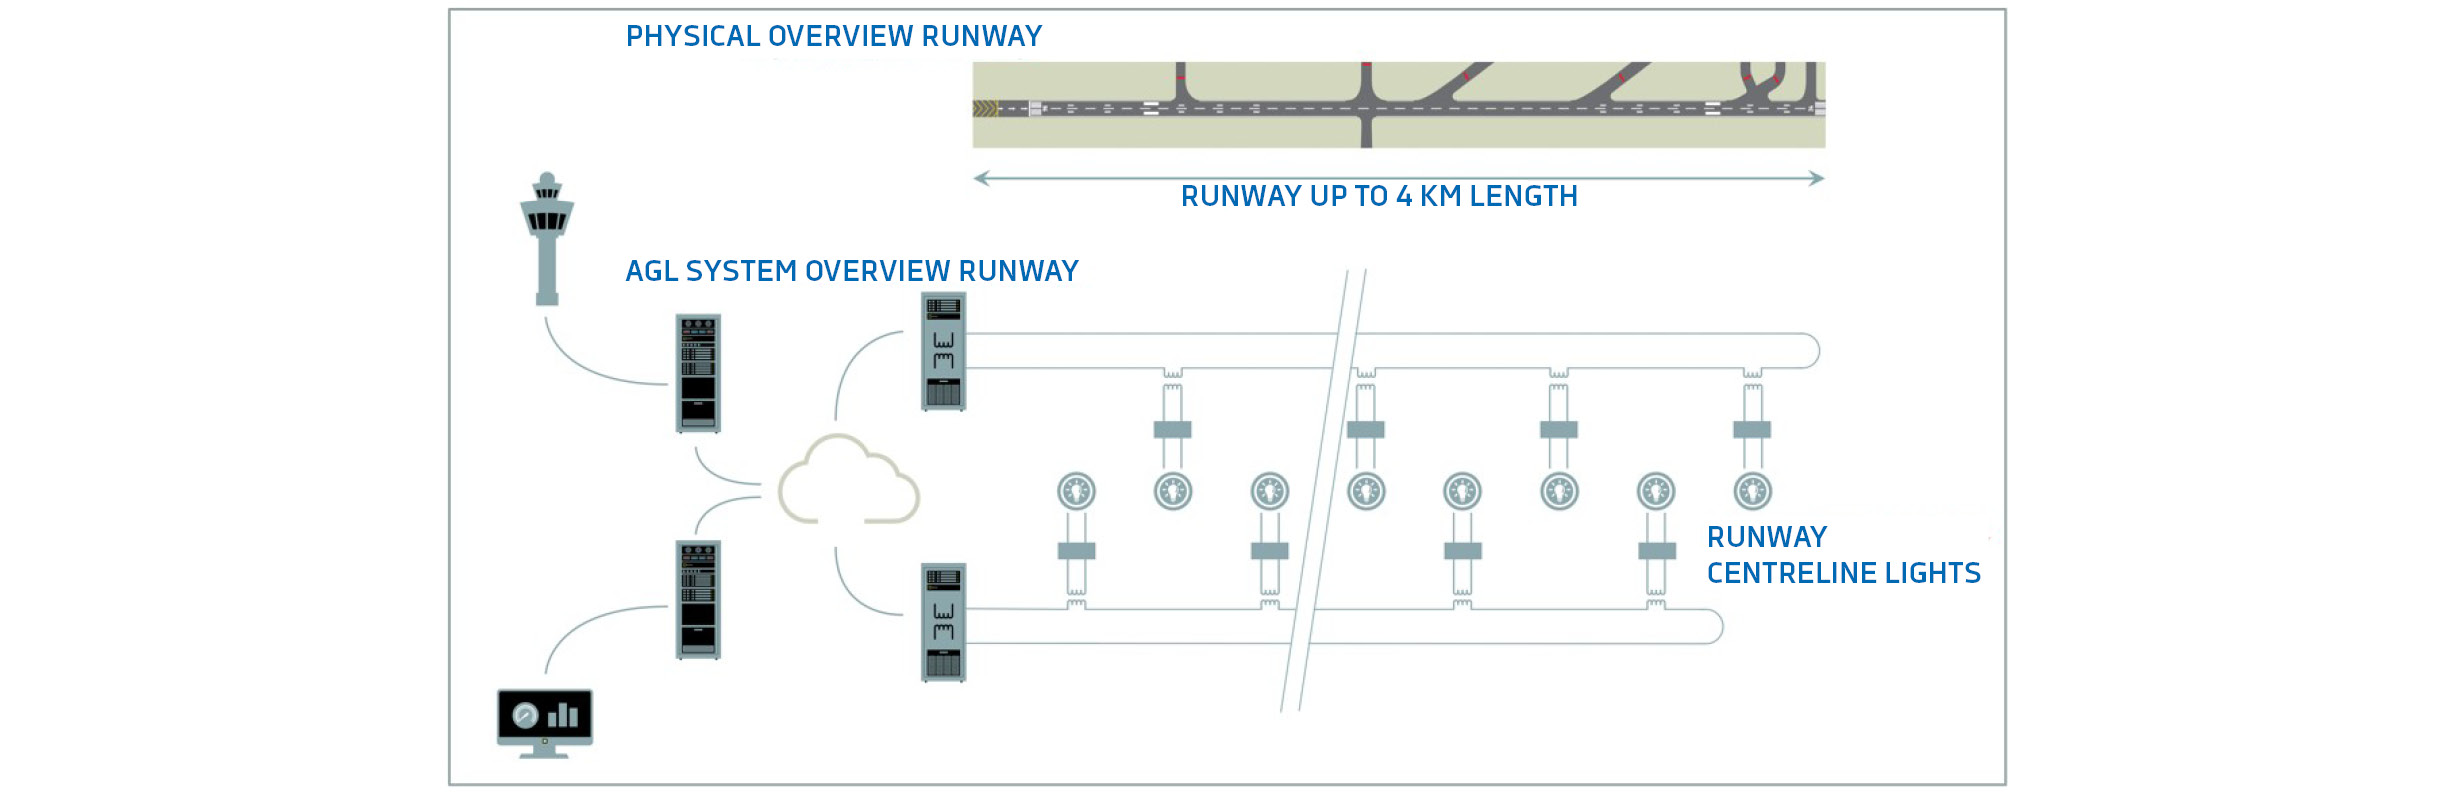 Overview AGL System Runway